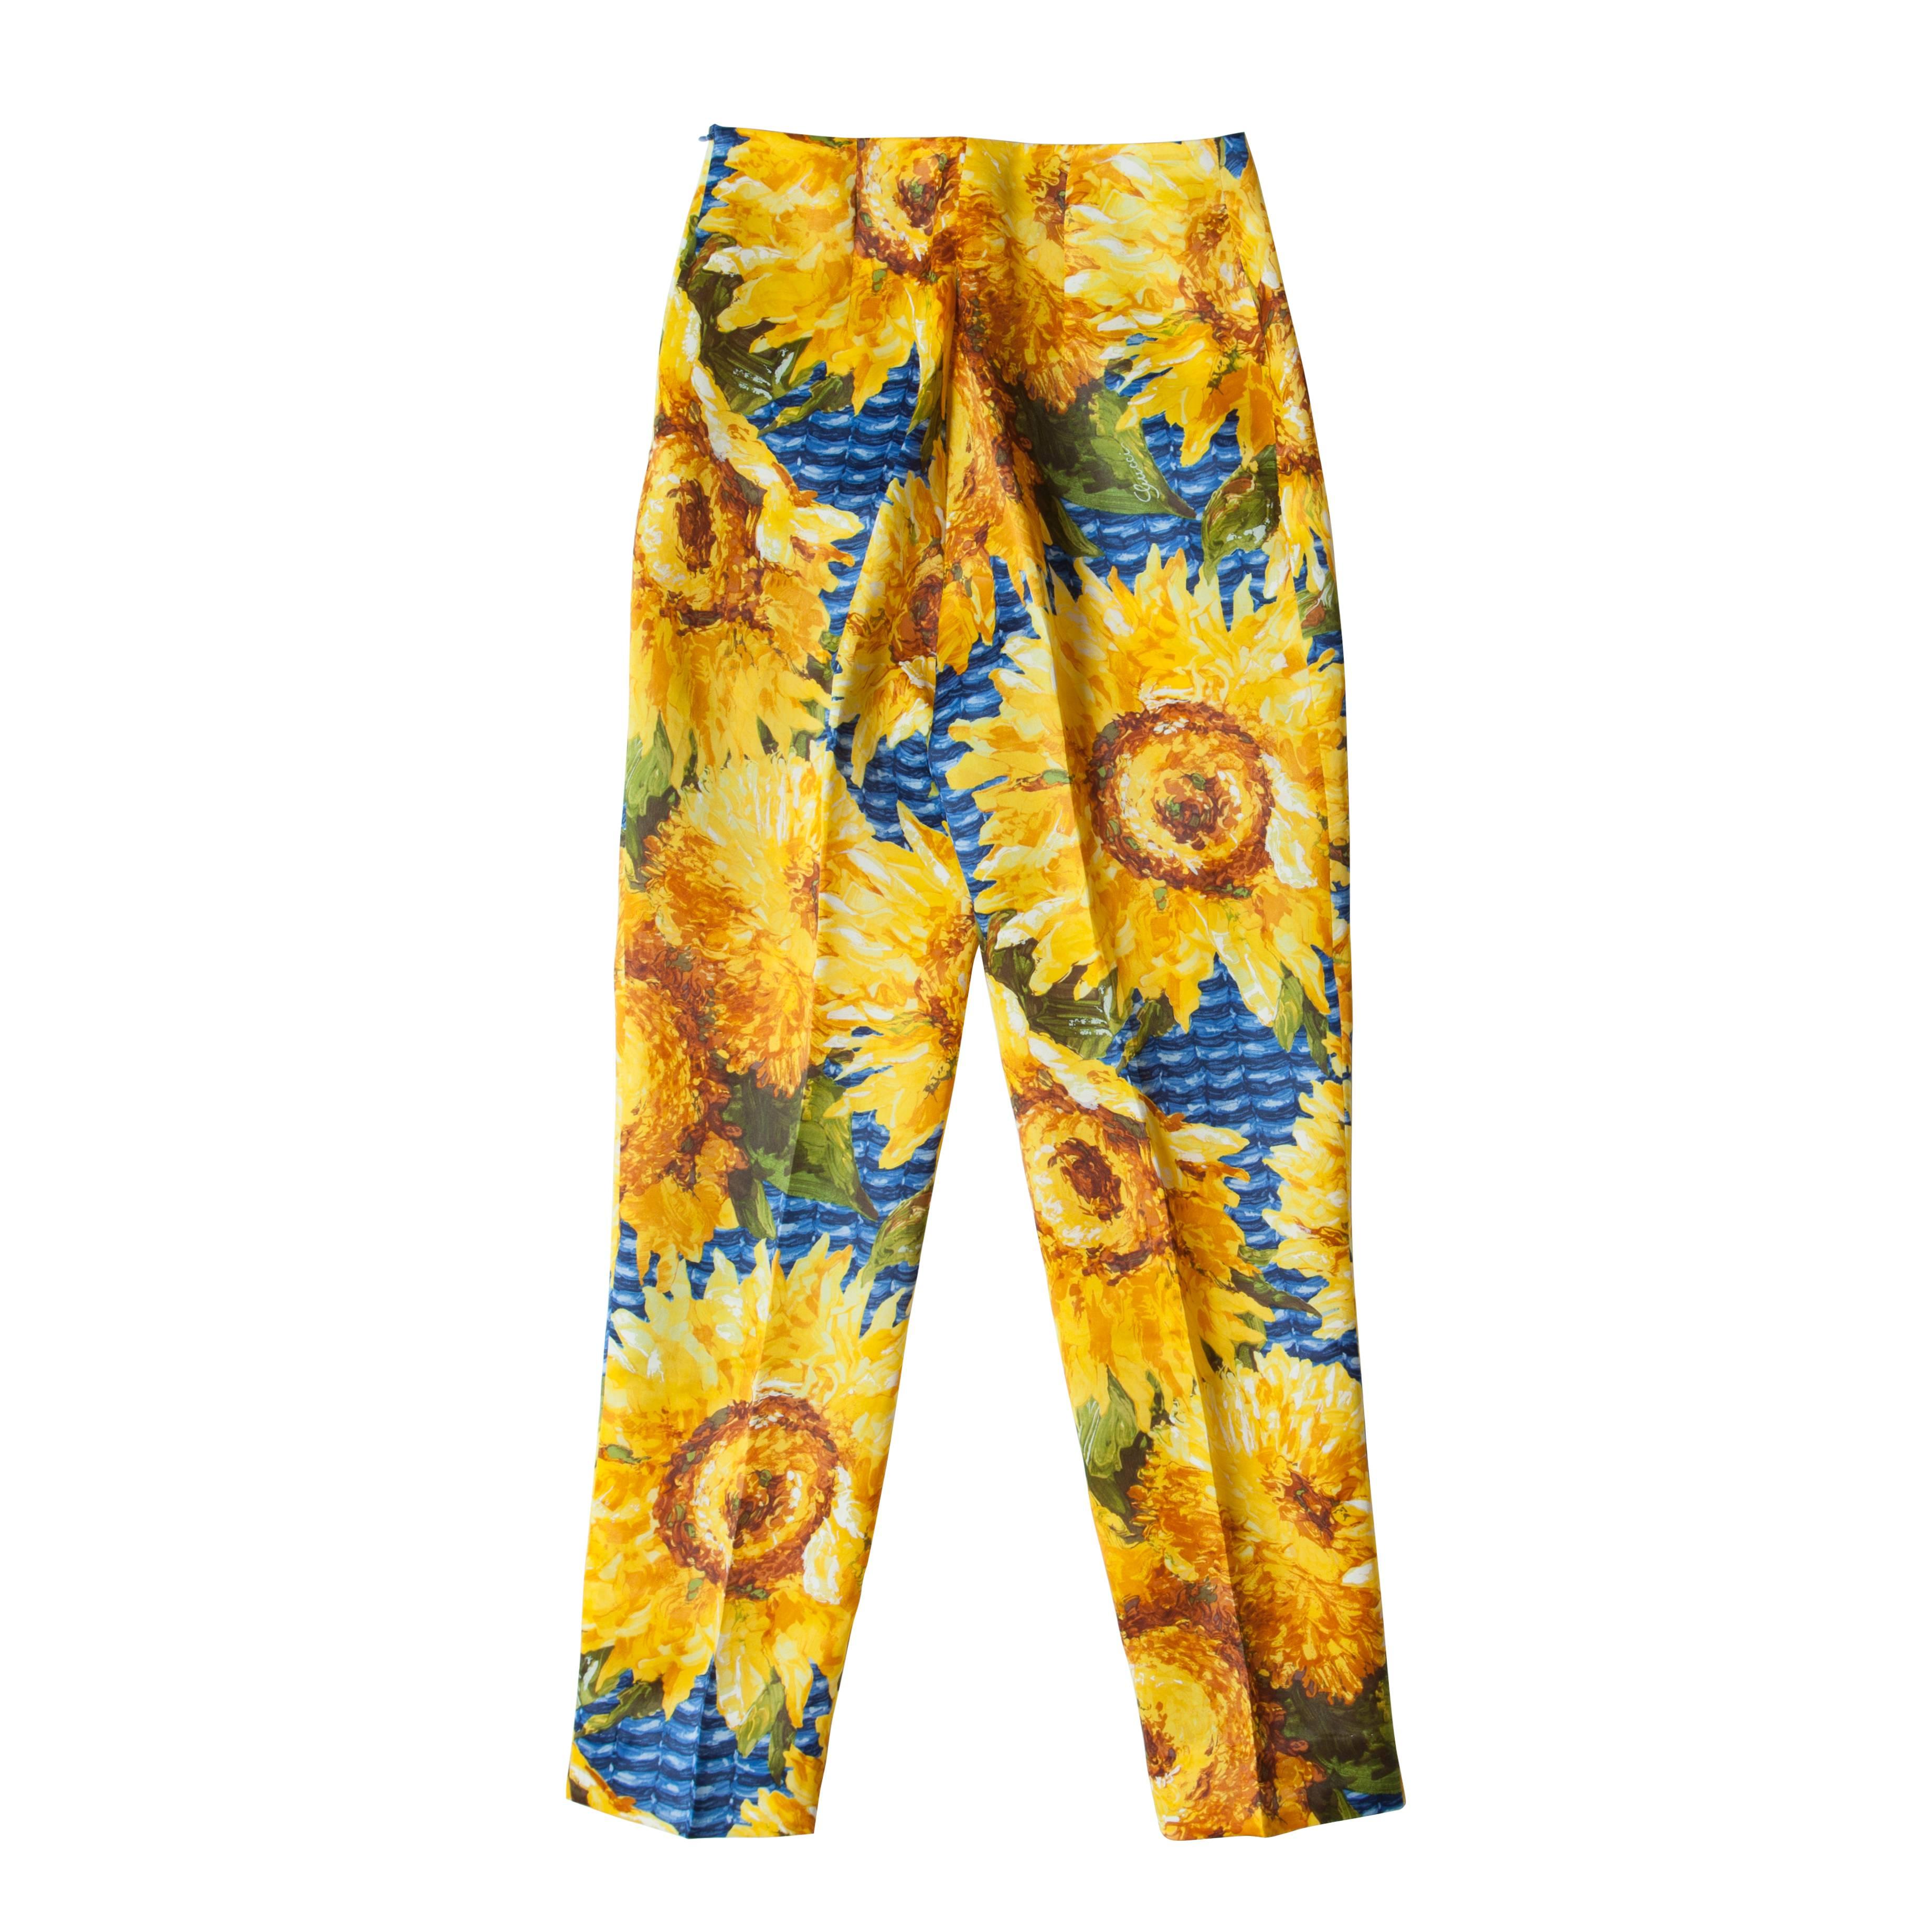 Gucci silk trousers feature a hand-painted bright sunflower print and an elegant cropped leg, center pressed.  Made in Italy. 
Material: 100% Silk.
Size : 42 Italian (It fits like 38EU, 6-8US)
Measurements : 
Waist : 32 cm
Length : 95 cm
Width